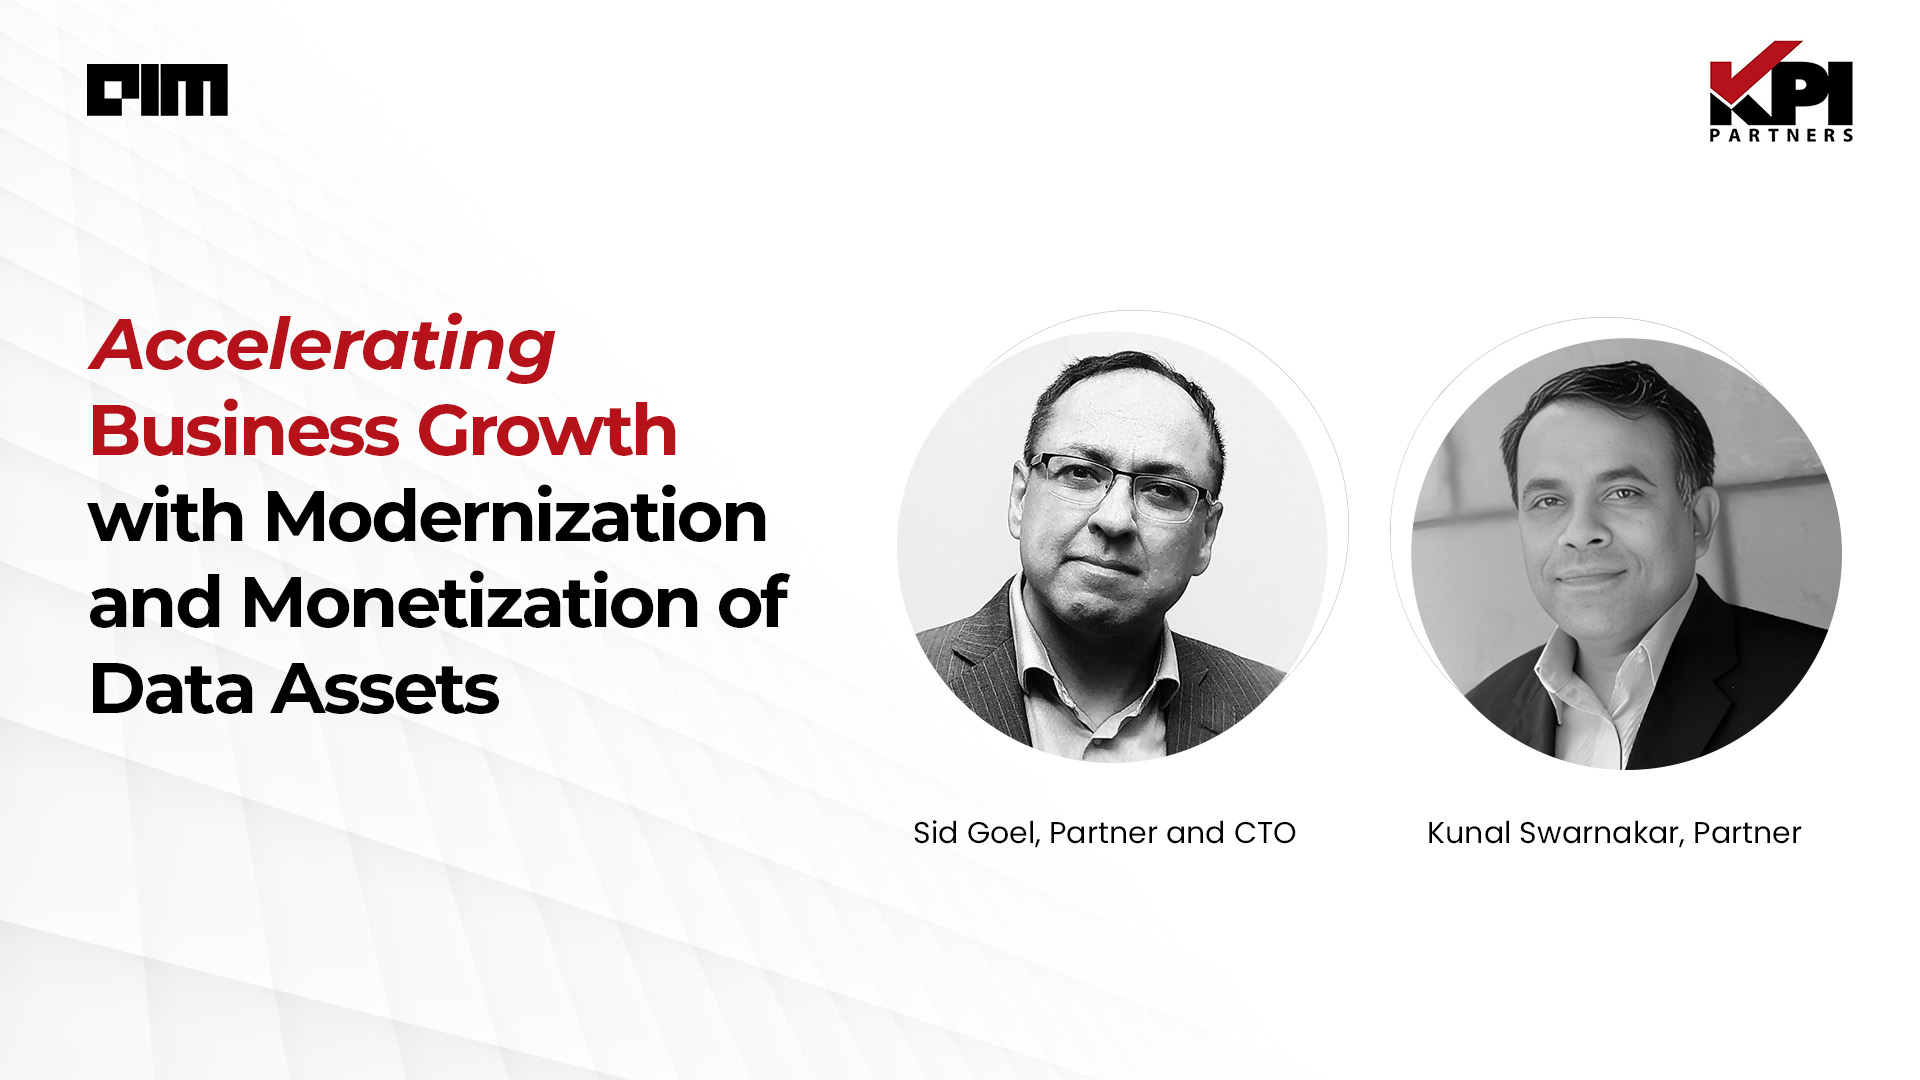 KPI Partners: Accelerating Business Growth with Modernization and Monetization of Data Assets